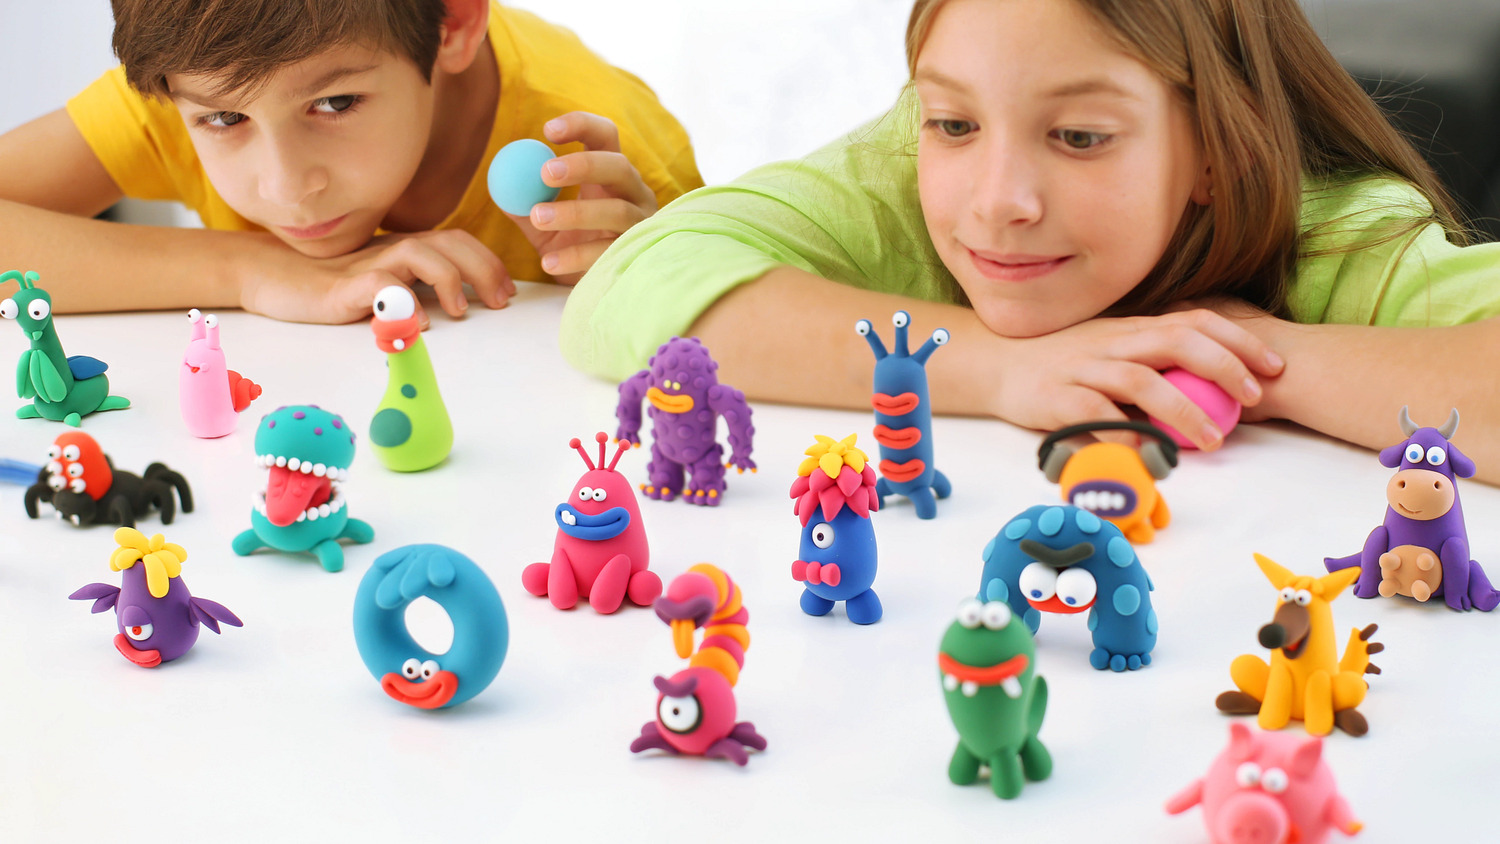 Kids Create Activity Air Dry Clay Assorted Designs